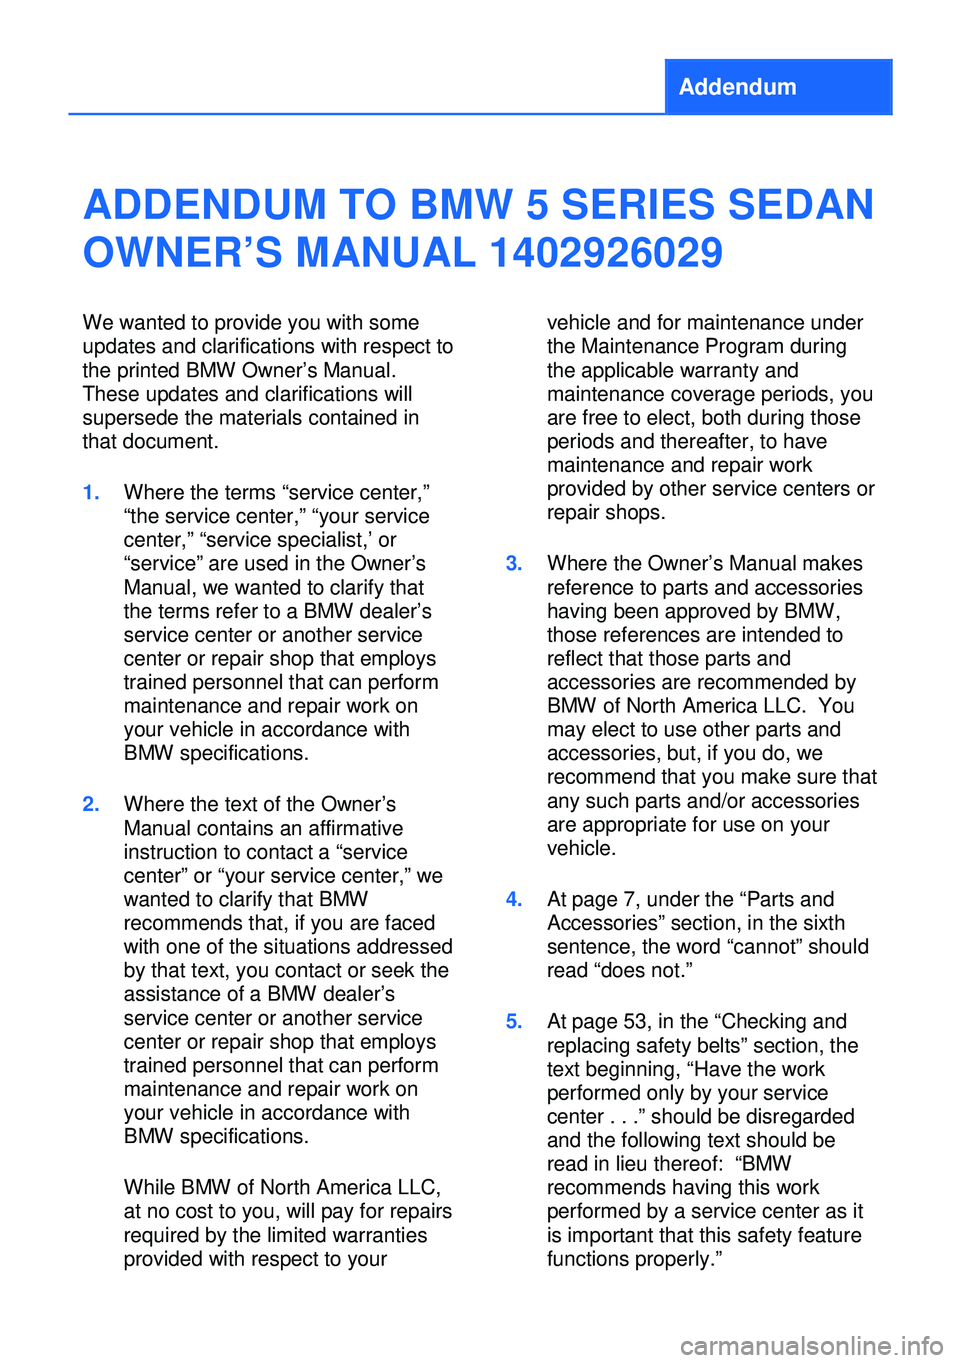 BMW 528I XDRIVE SEDAN 2013  Owners Manual Addendum
ADDENDUM TO BMW 5 SERIES SEDAN
OWNER’S MANUAL 1402926029
We wanted to provide you with some
updates and clarifications with respect to
the printed BMW Owner’s Manual.
These updates and cl